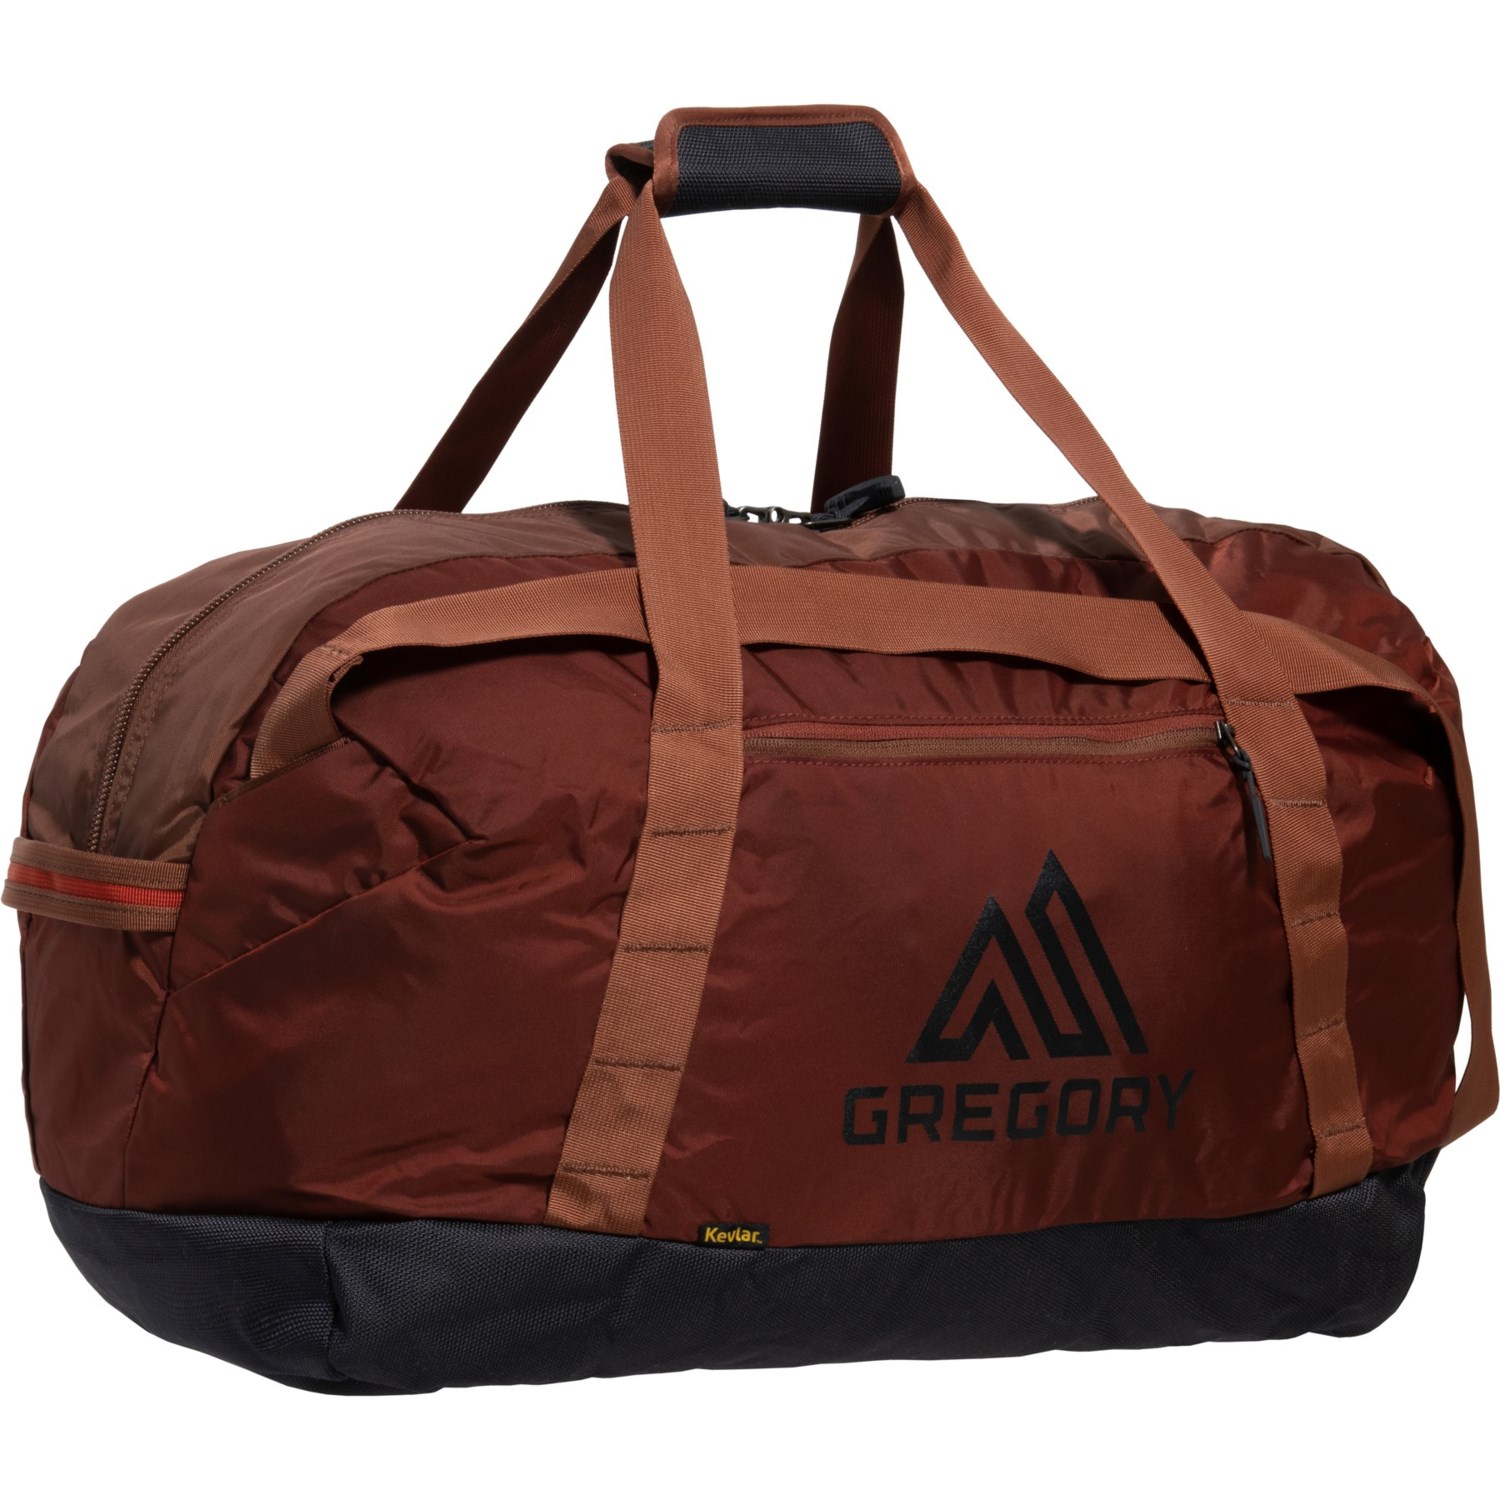 Gregory Supply 40 L Duffel Bag - Brick Red - Save 52%